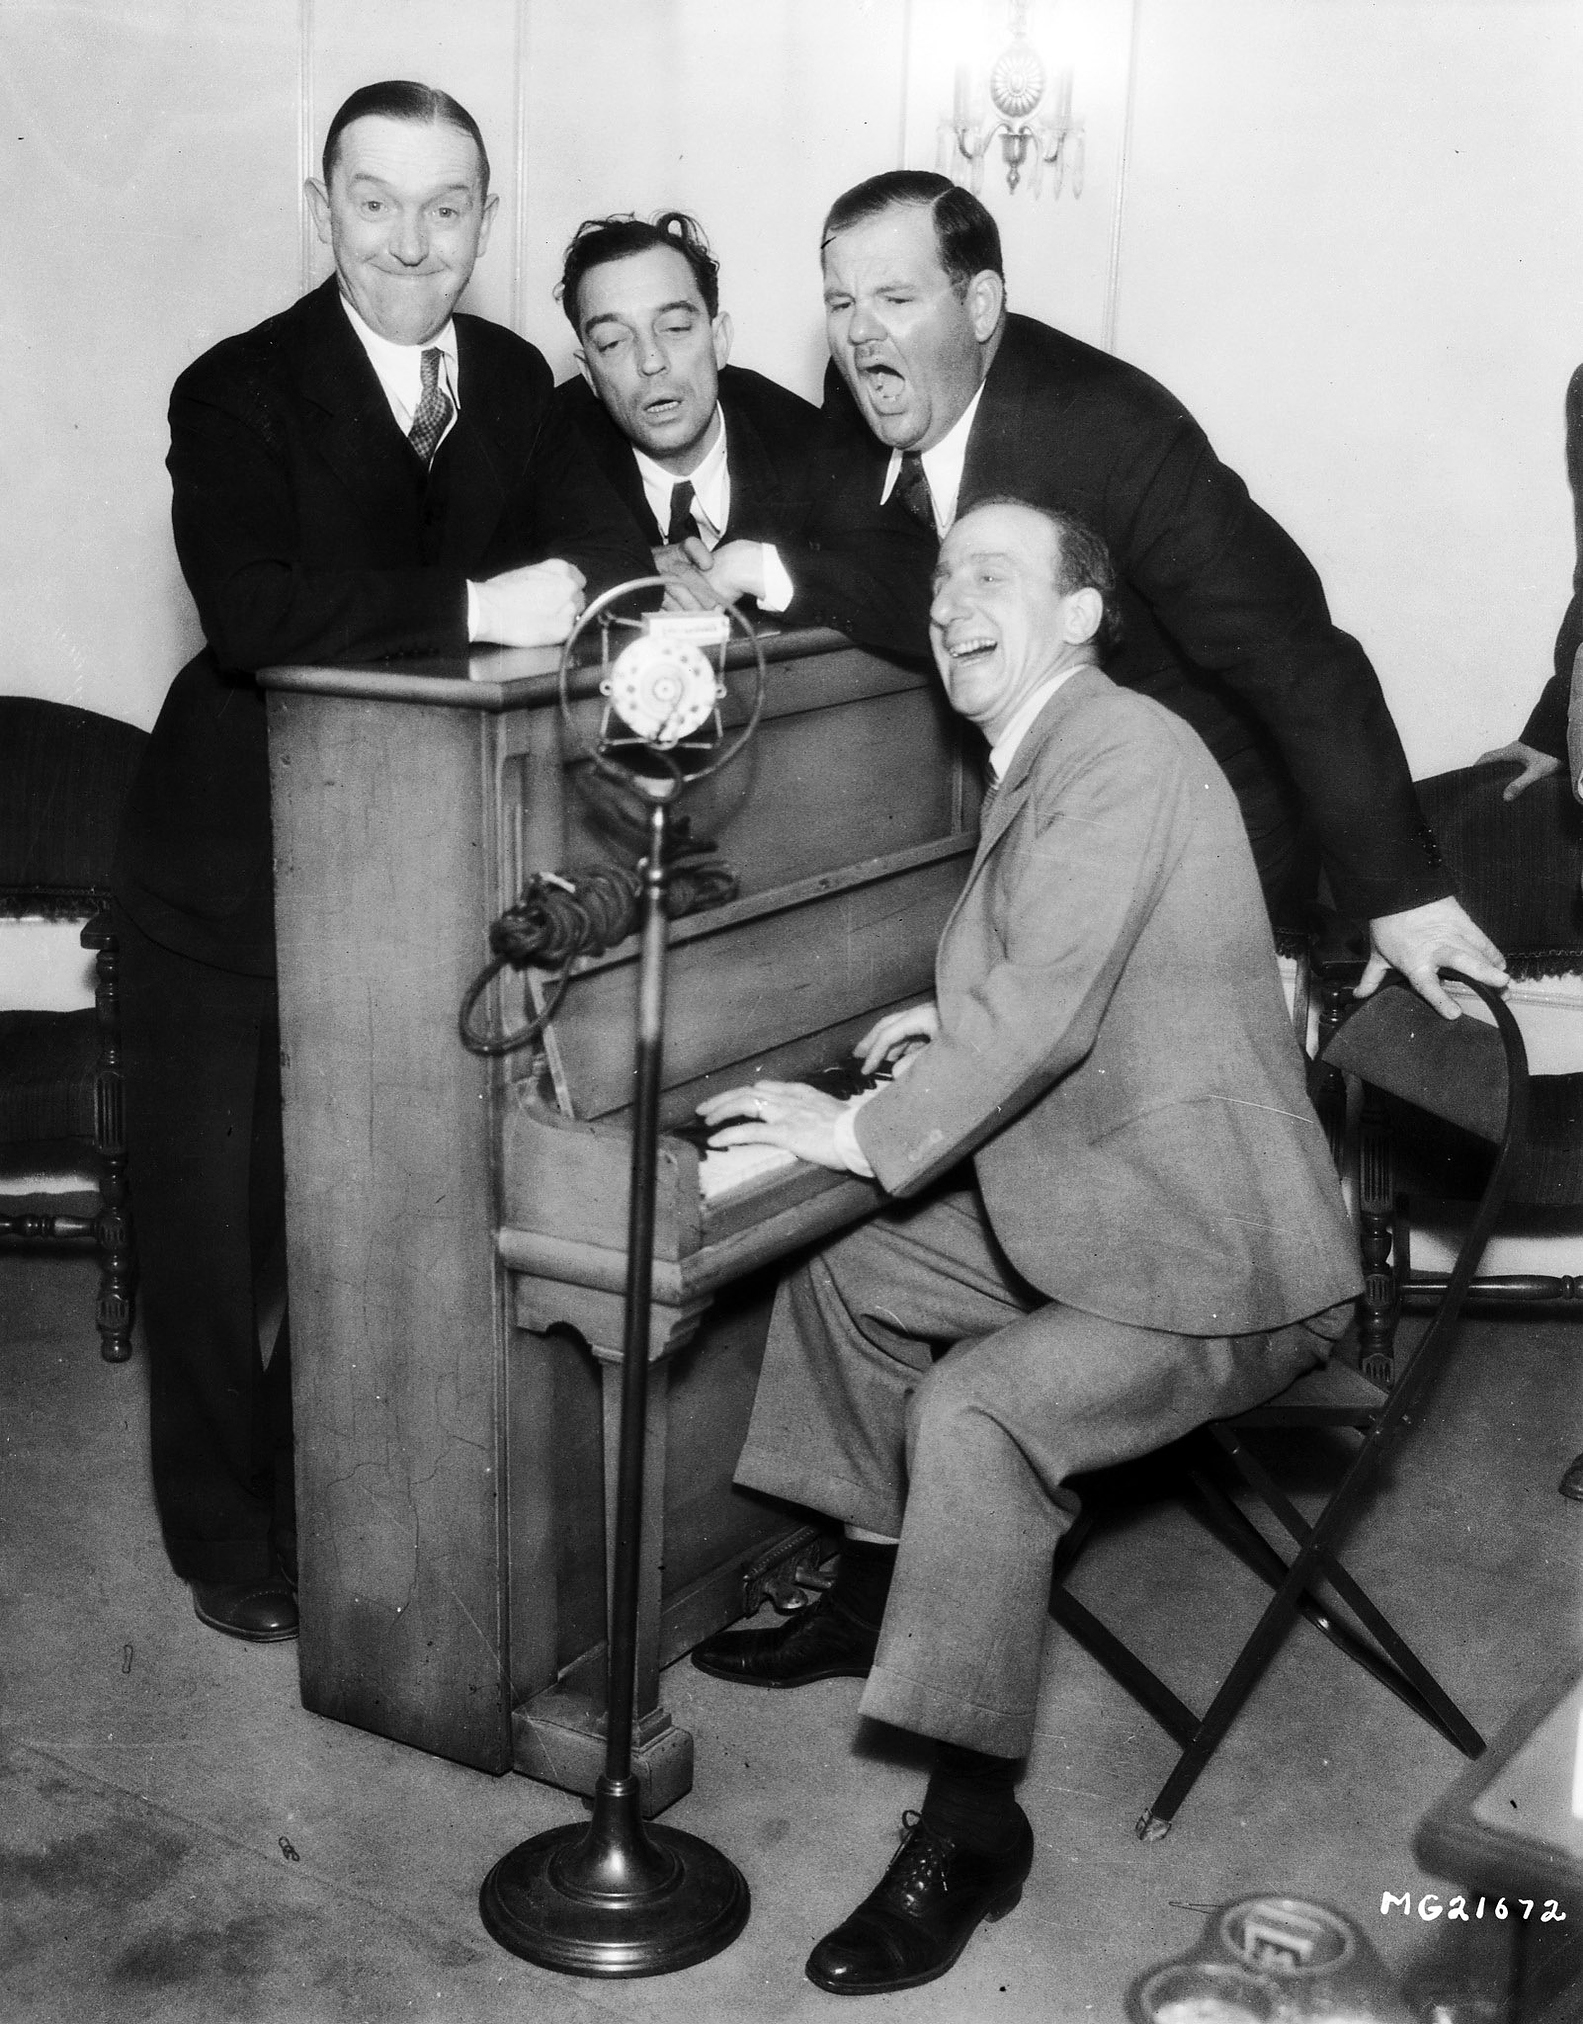 American silent screen comedian and actor Buster Keaton with fellow comedians Jimmy Durante, Stan Laurel and Oliver Hardy, 1931.